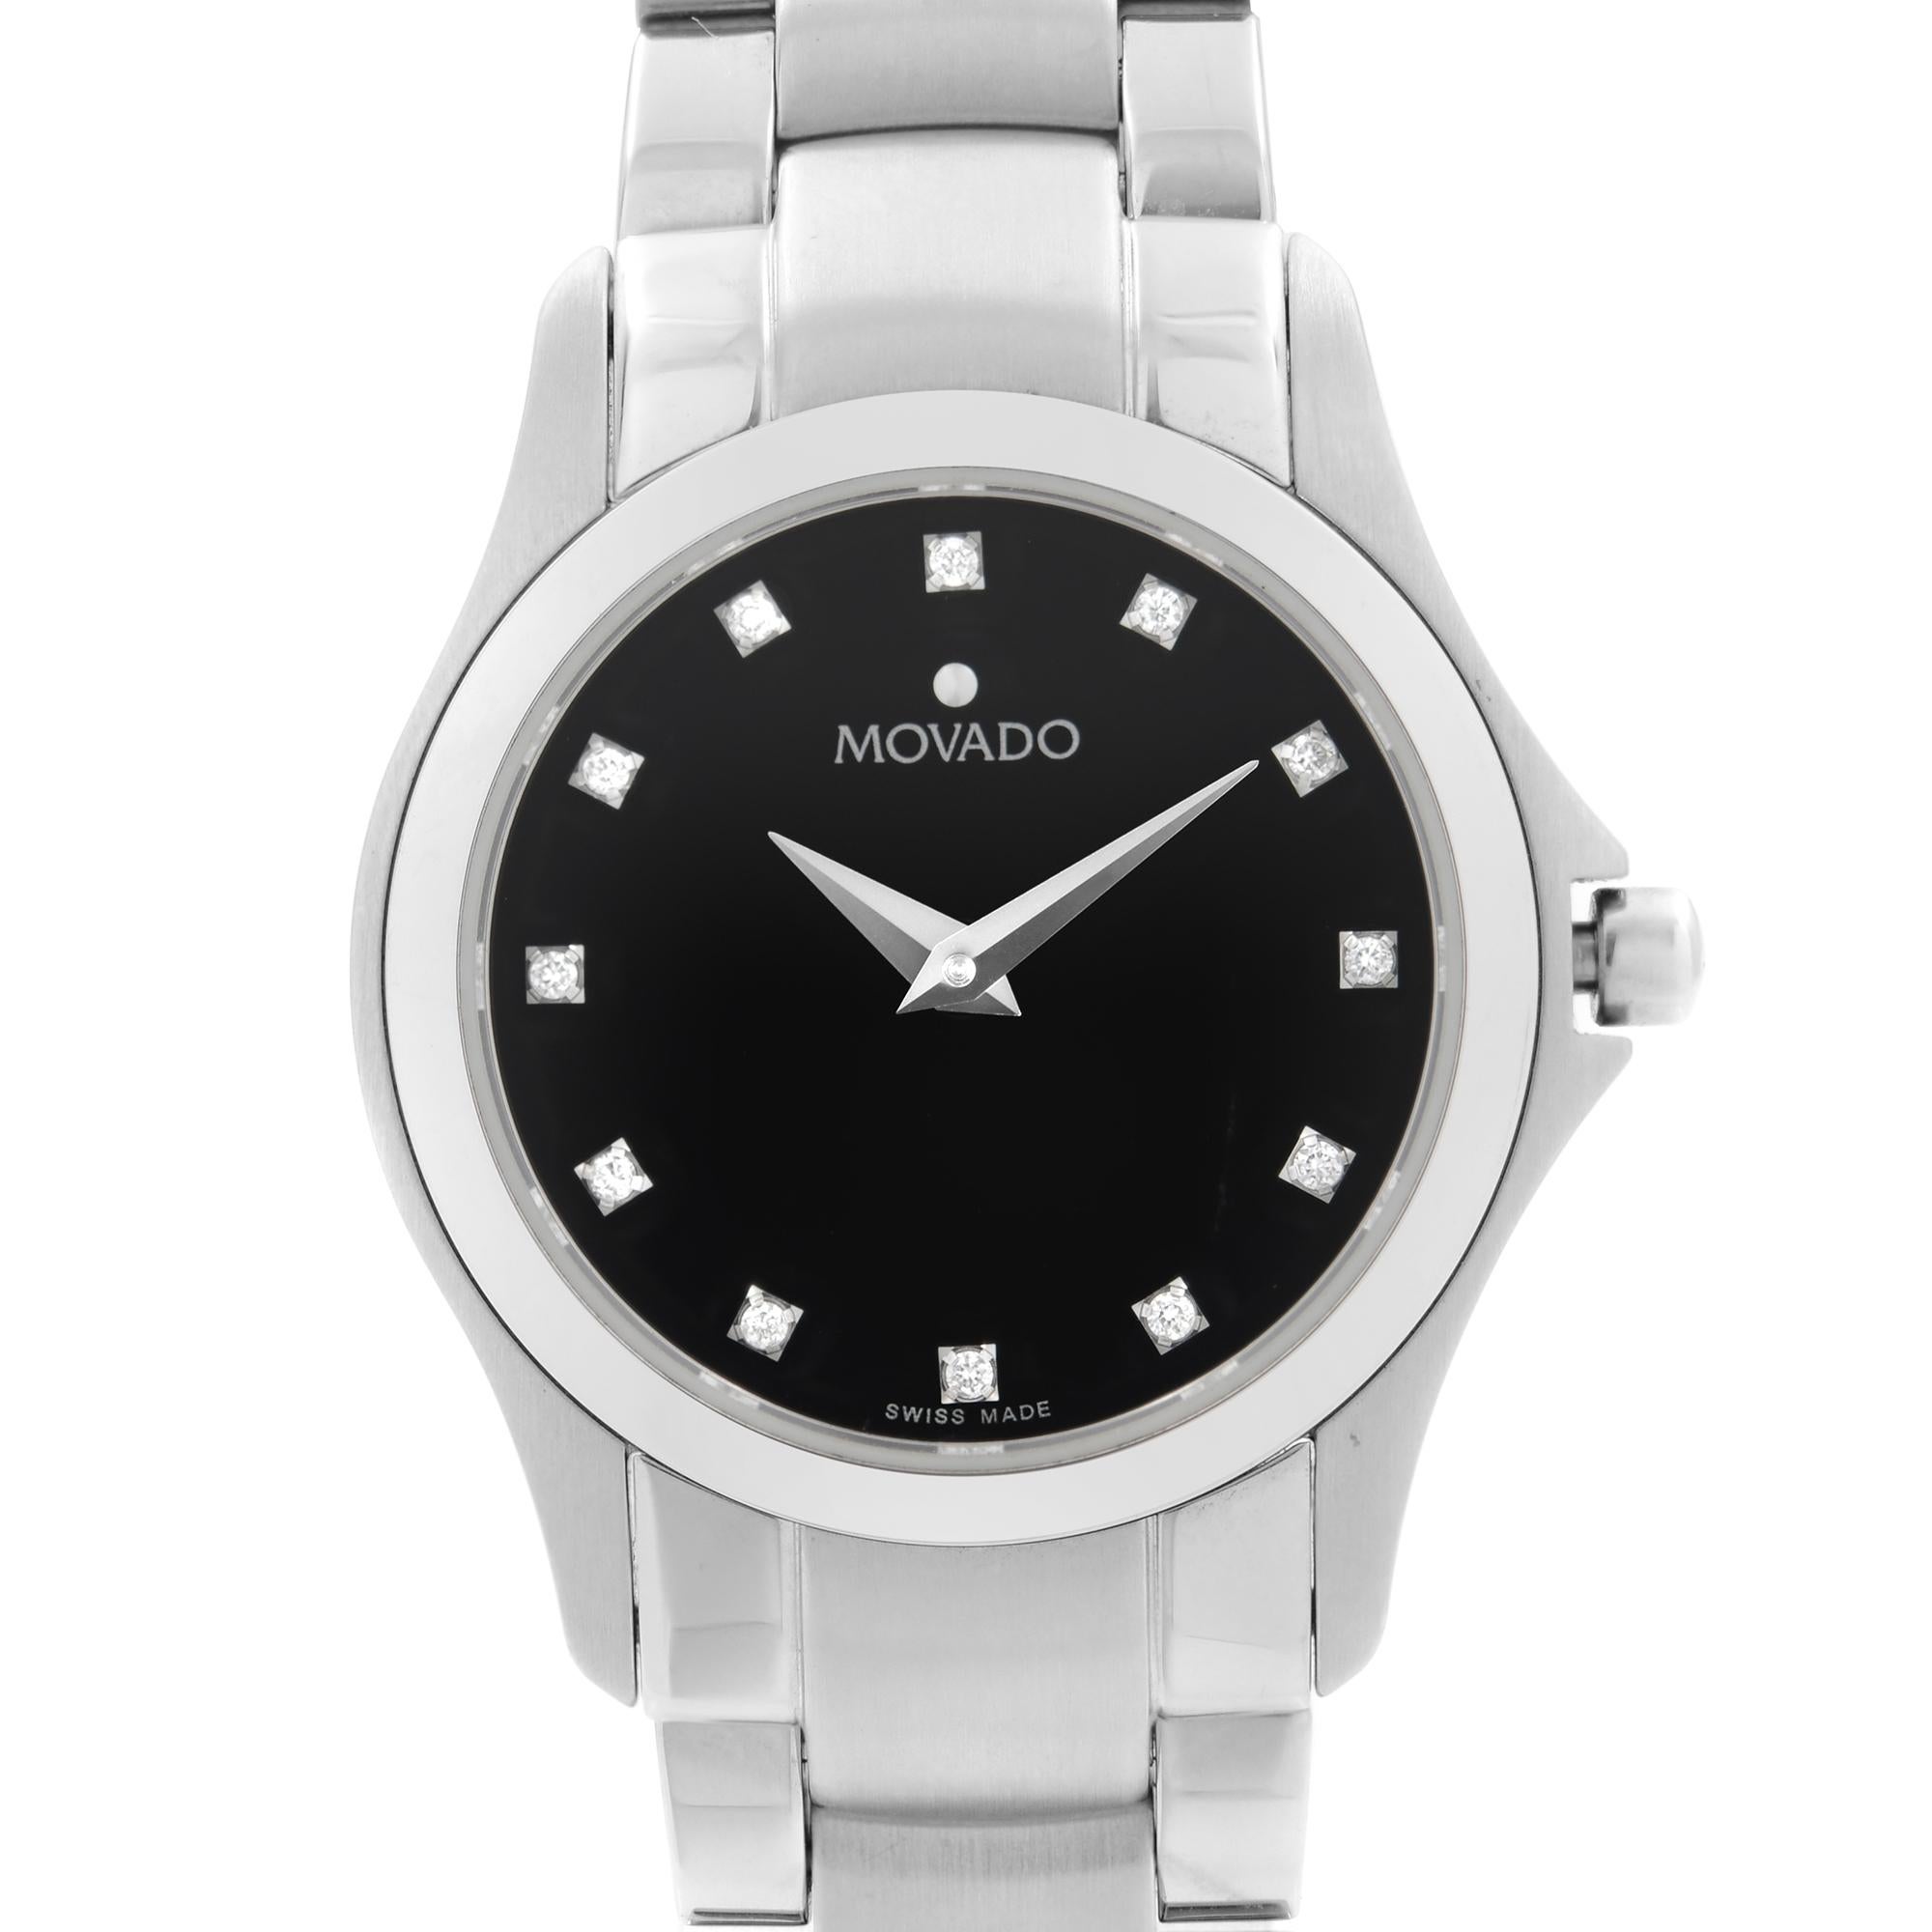 Never Worn Movado Masino 26mm Steel Black Diamond Dial Quartz Ladies Watch 0606186. This Beautiful Timepiece Features:  Stainless Steel Case, Bracelet and Bezel, Black Dial with Stainless Steel Hands and Diamond Hour Markers. Original Box and Papers